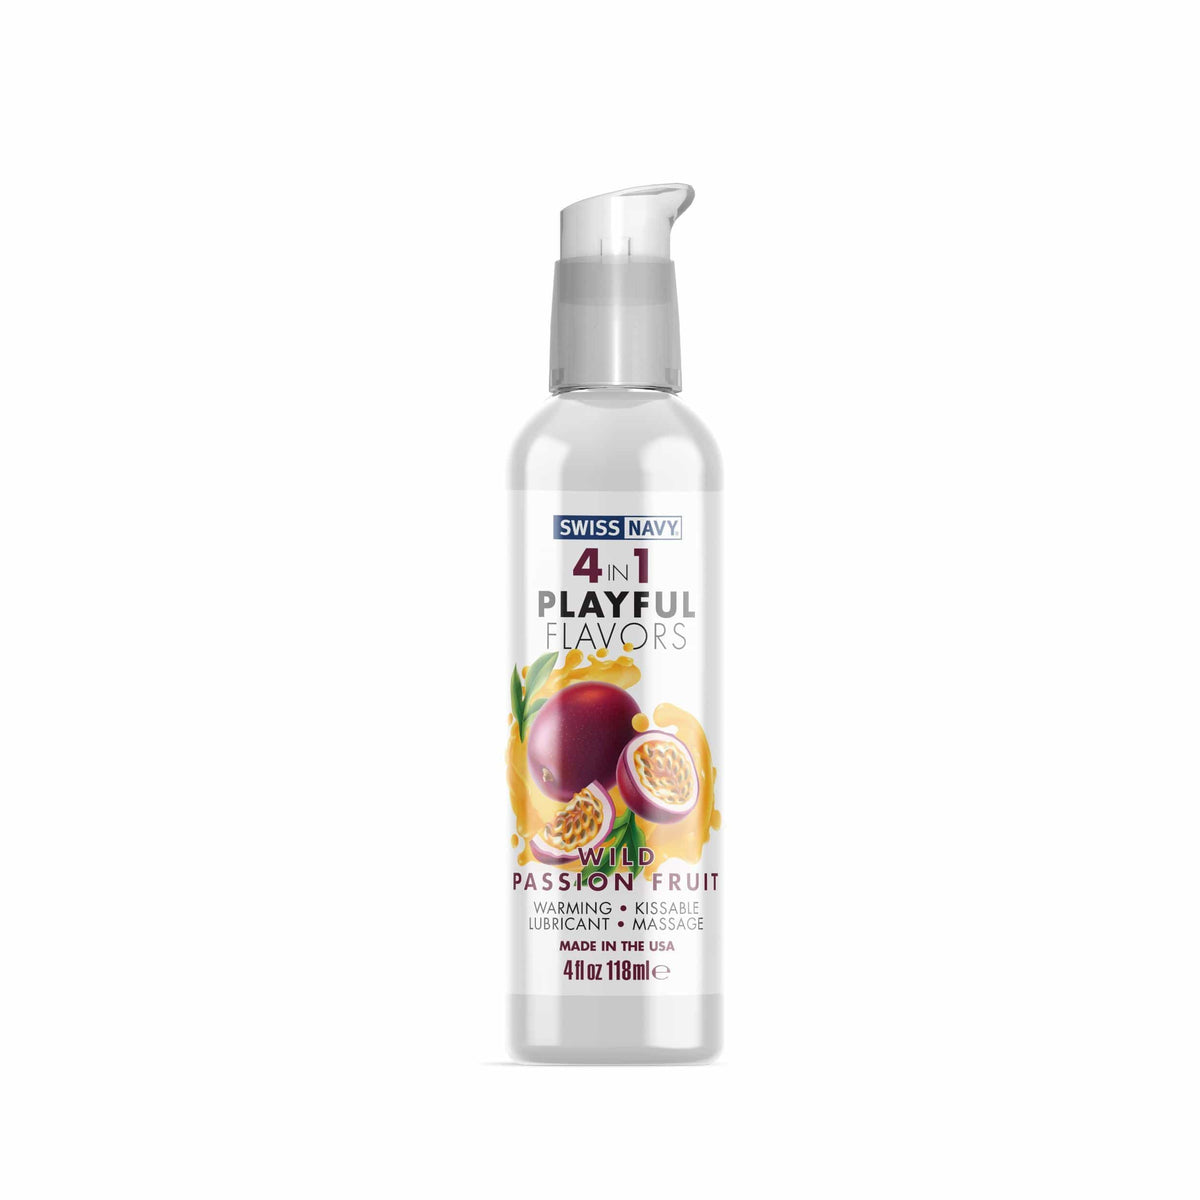 swiss navy 4 in 1 playful flavors wild passion fruit 4 fl oz